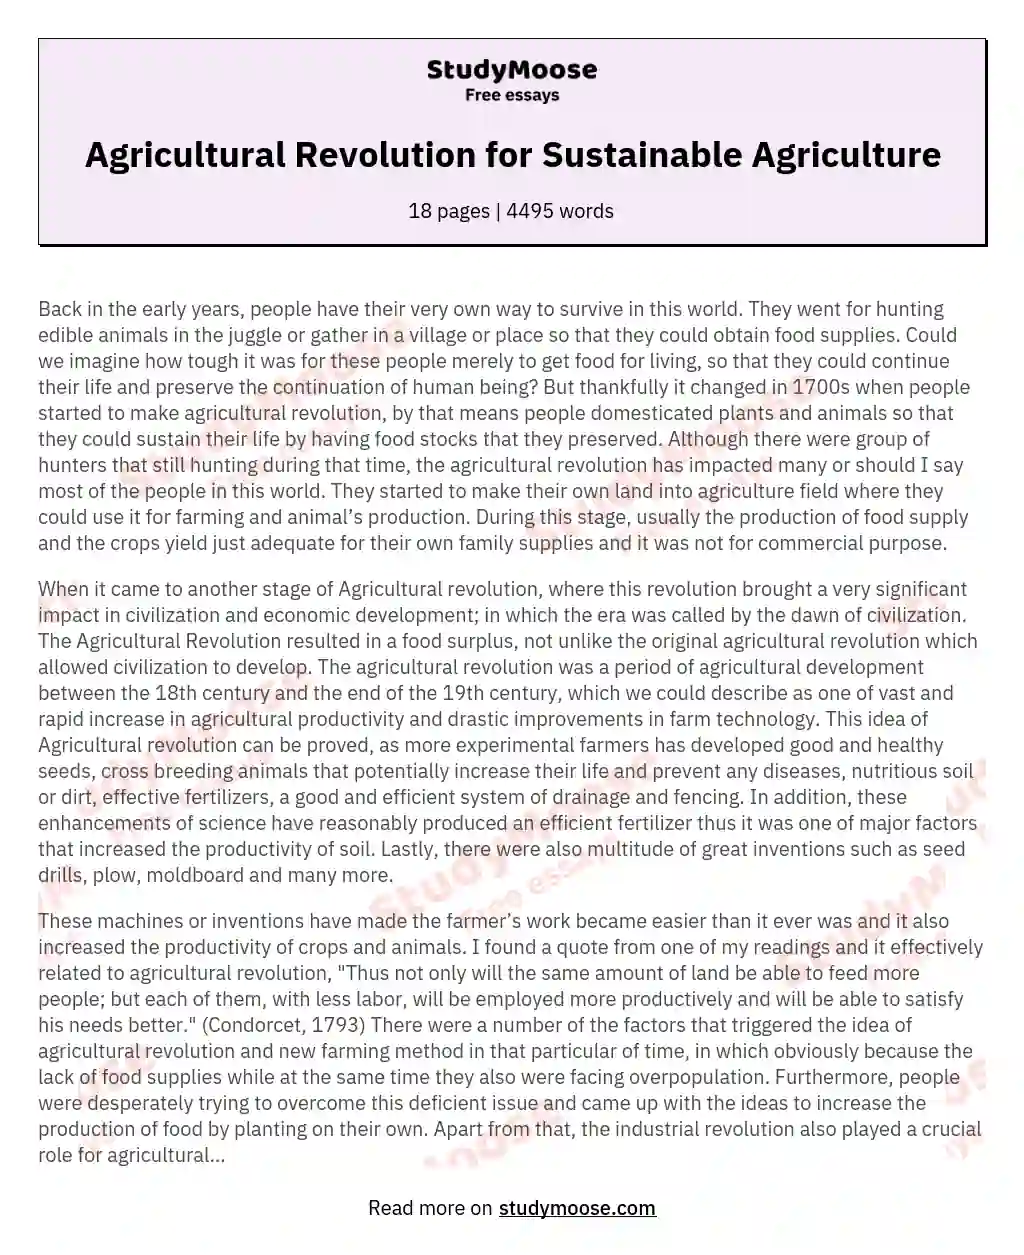 Agricultural Revolution for Sustainable Agriculture